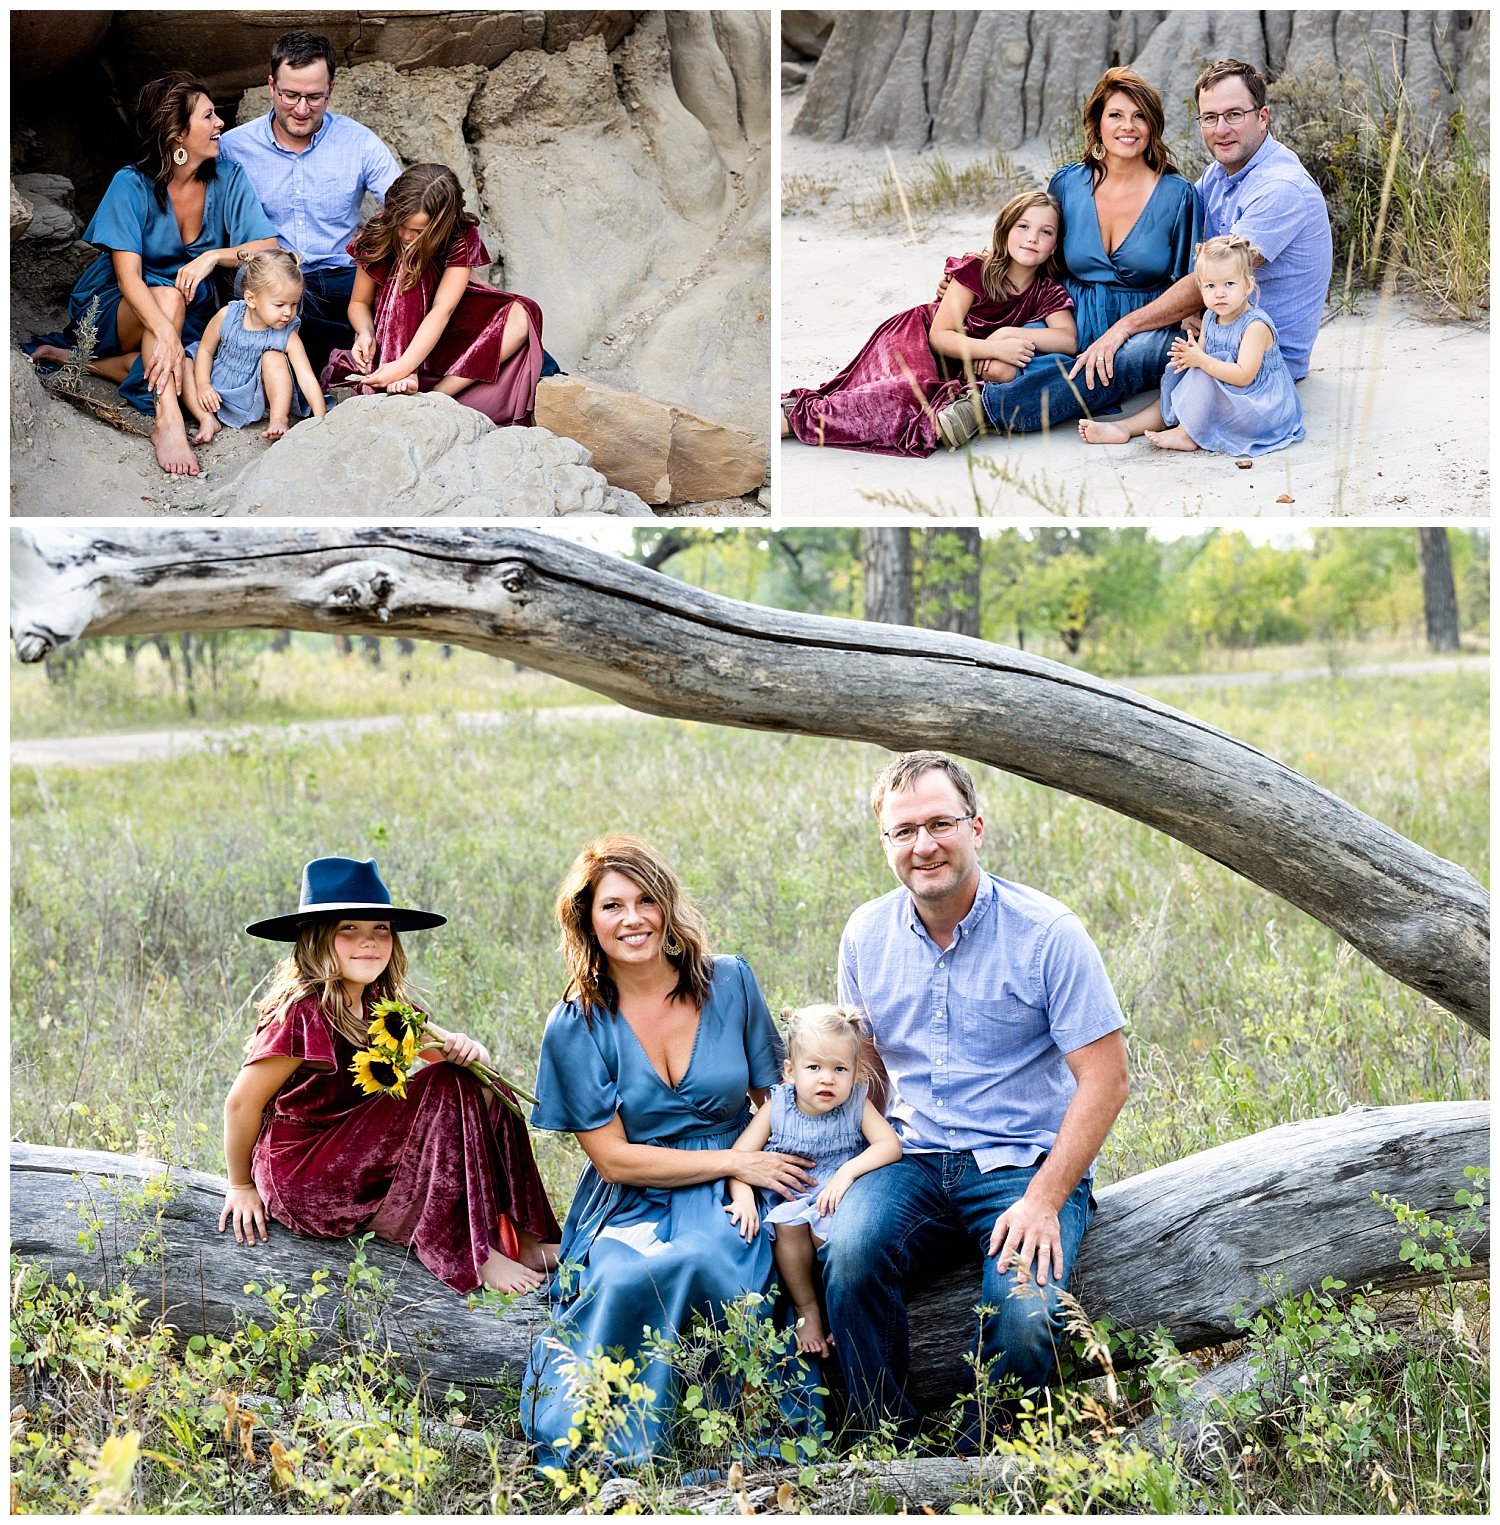 Outdoor family session wardrobe styled by Style and Select.